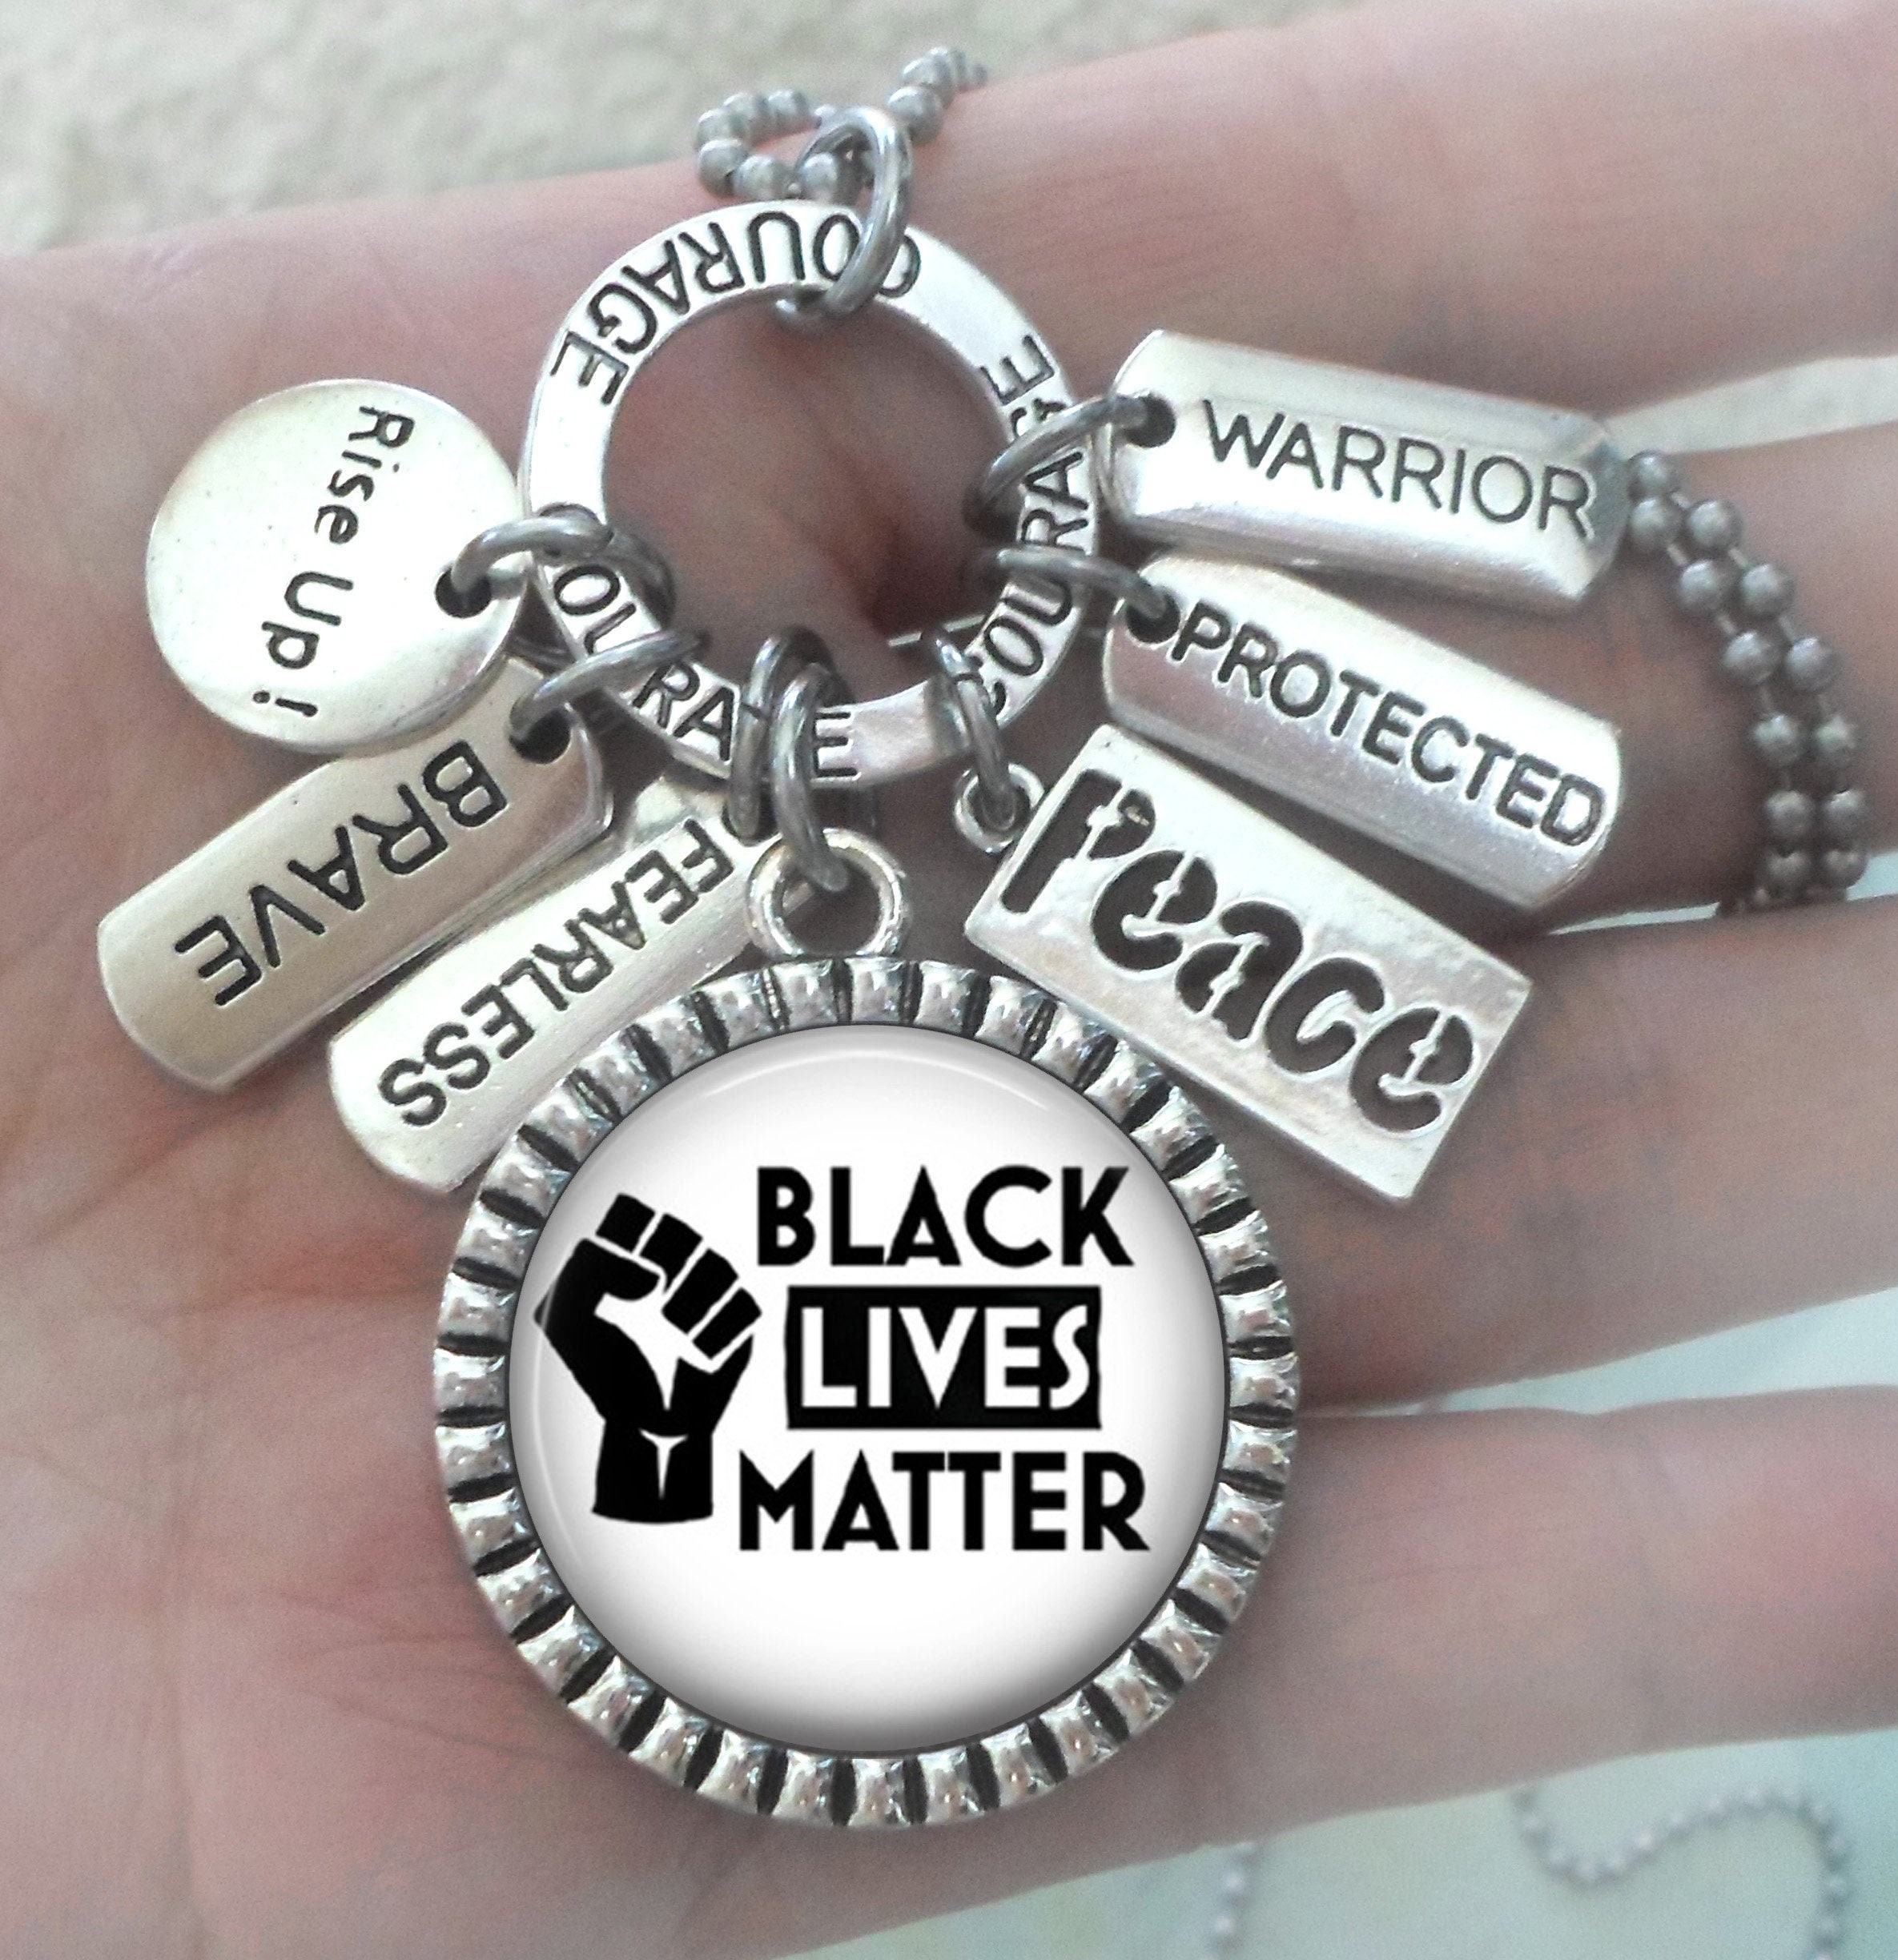 Black Lives Matter Necklace, Keychain Or Clip, Fearless, Brave, Rise Up Protected, Peace, Courage, Warrior, Blm, Handcrafted With Love